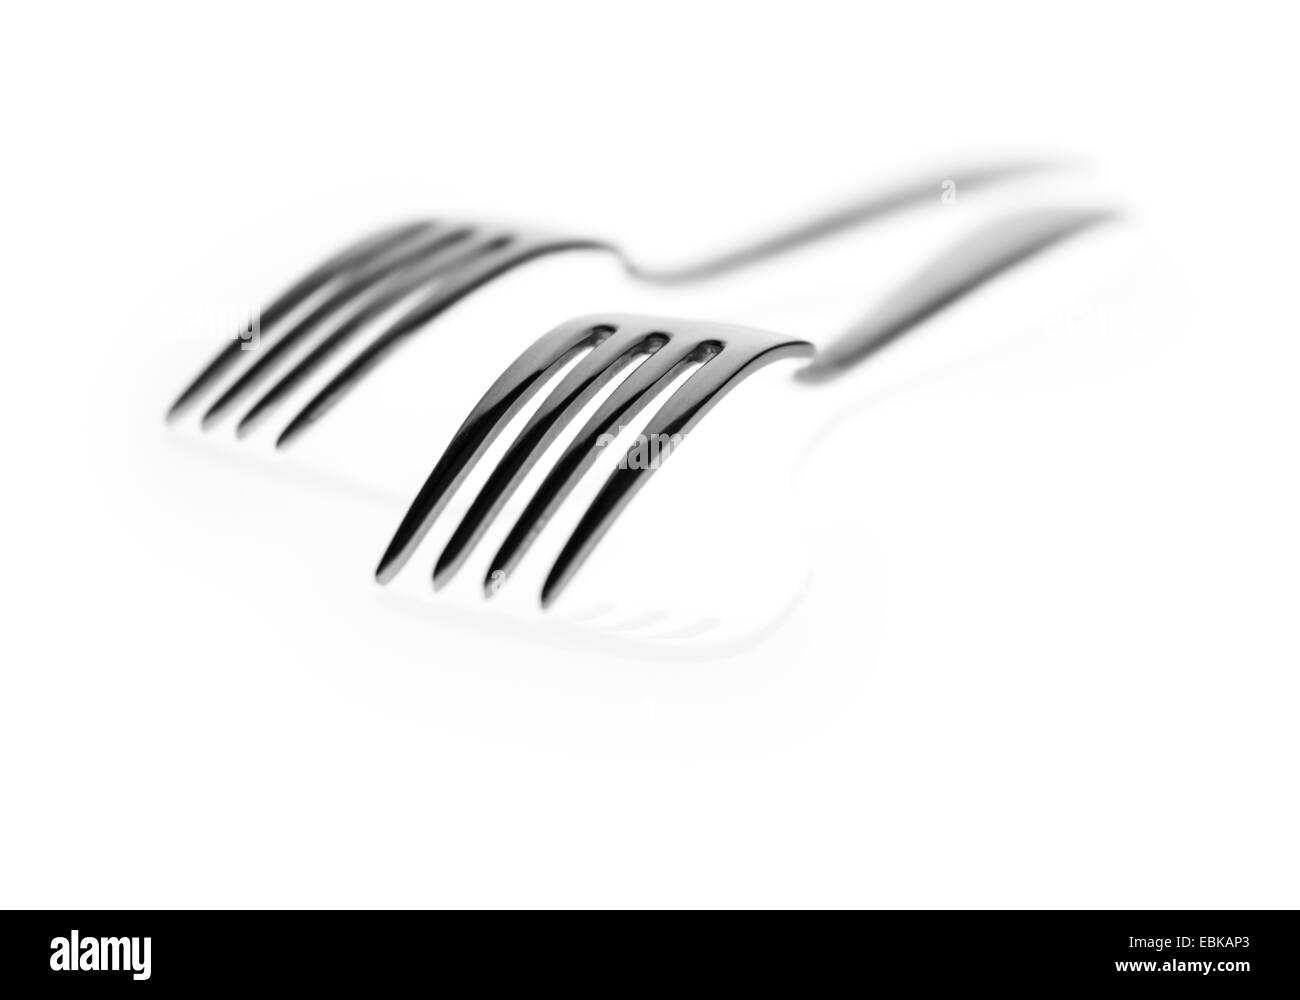 Two forks shot on a light box Stock Photo